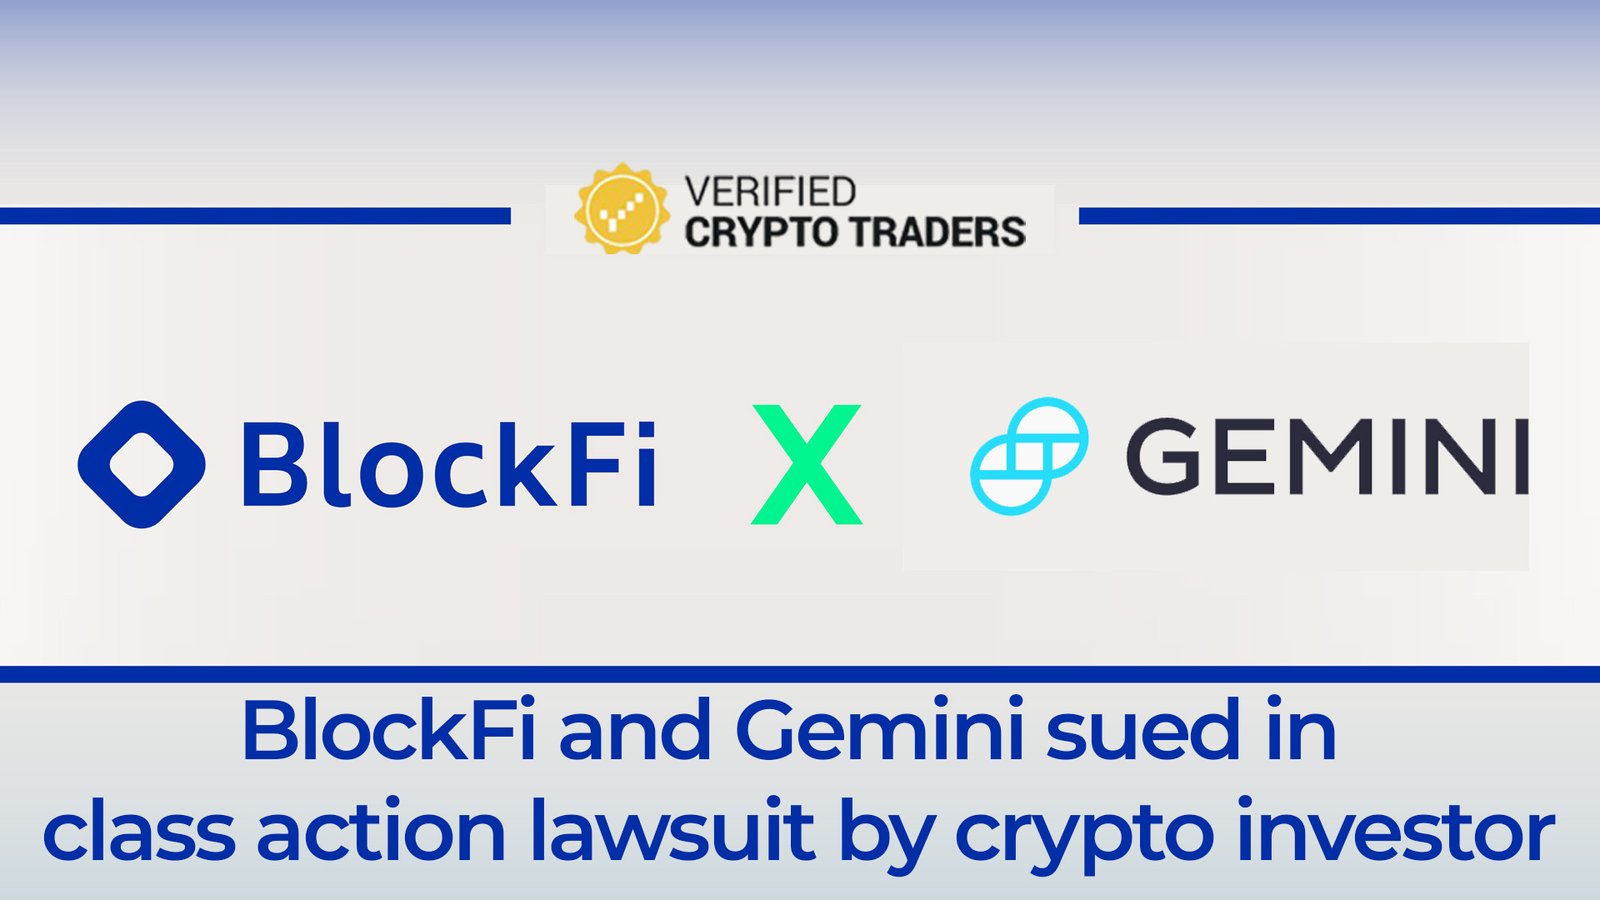 Investor Files Class-Action Complaint Against BlockFi and Gemini for Selling Unregistered Securities